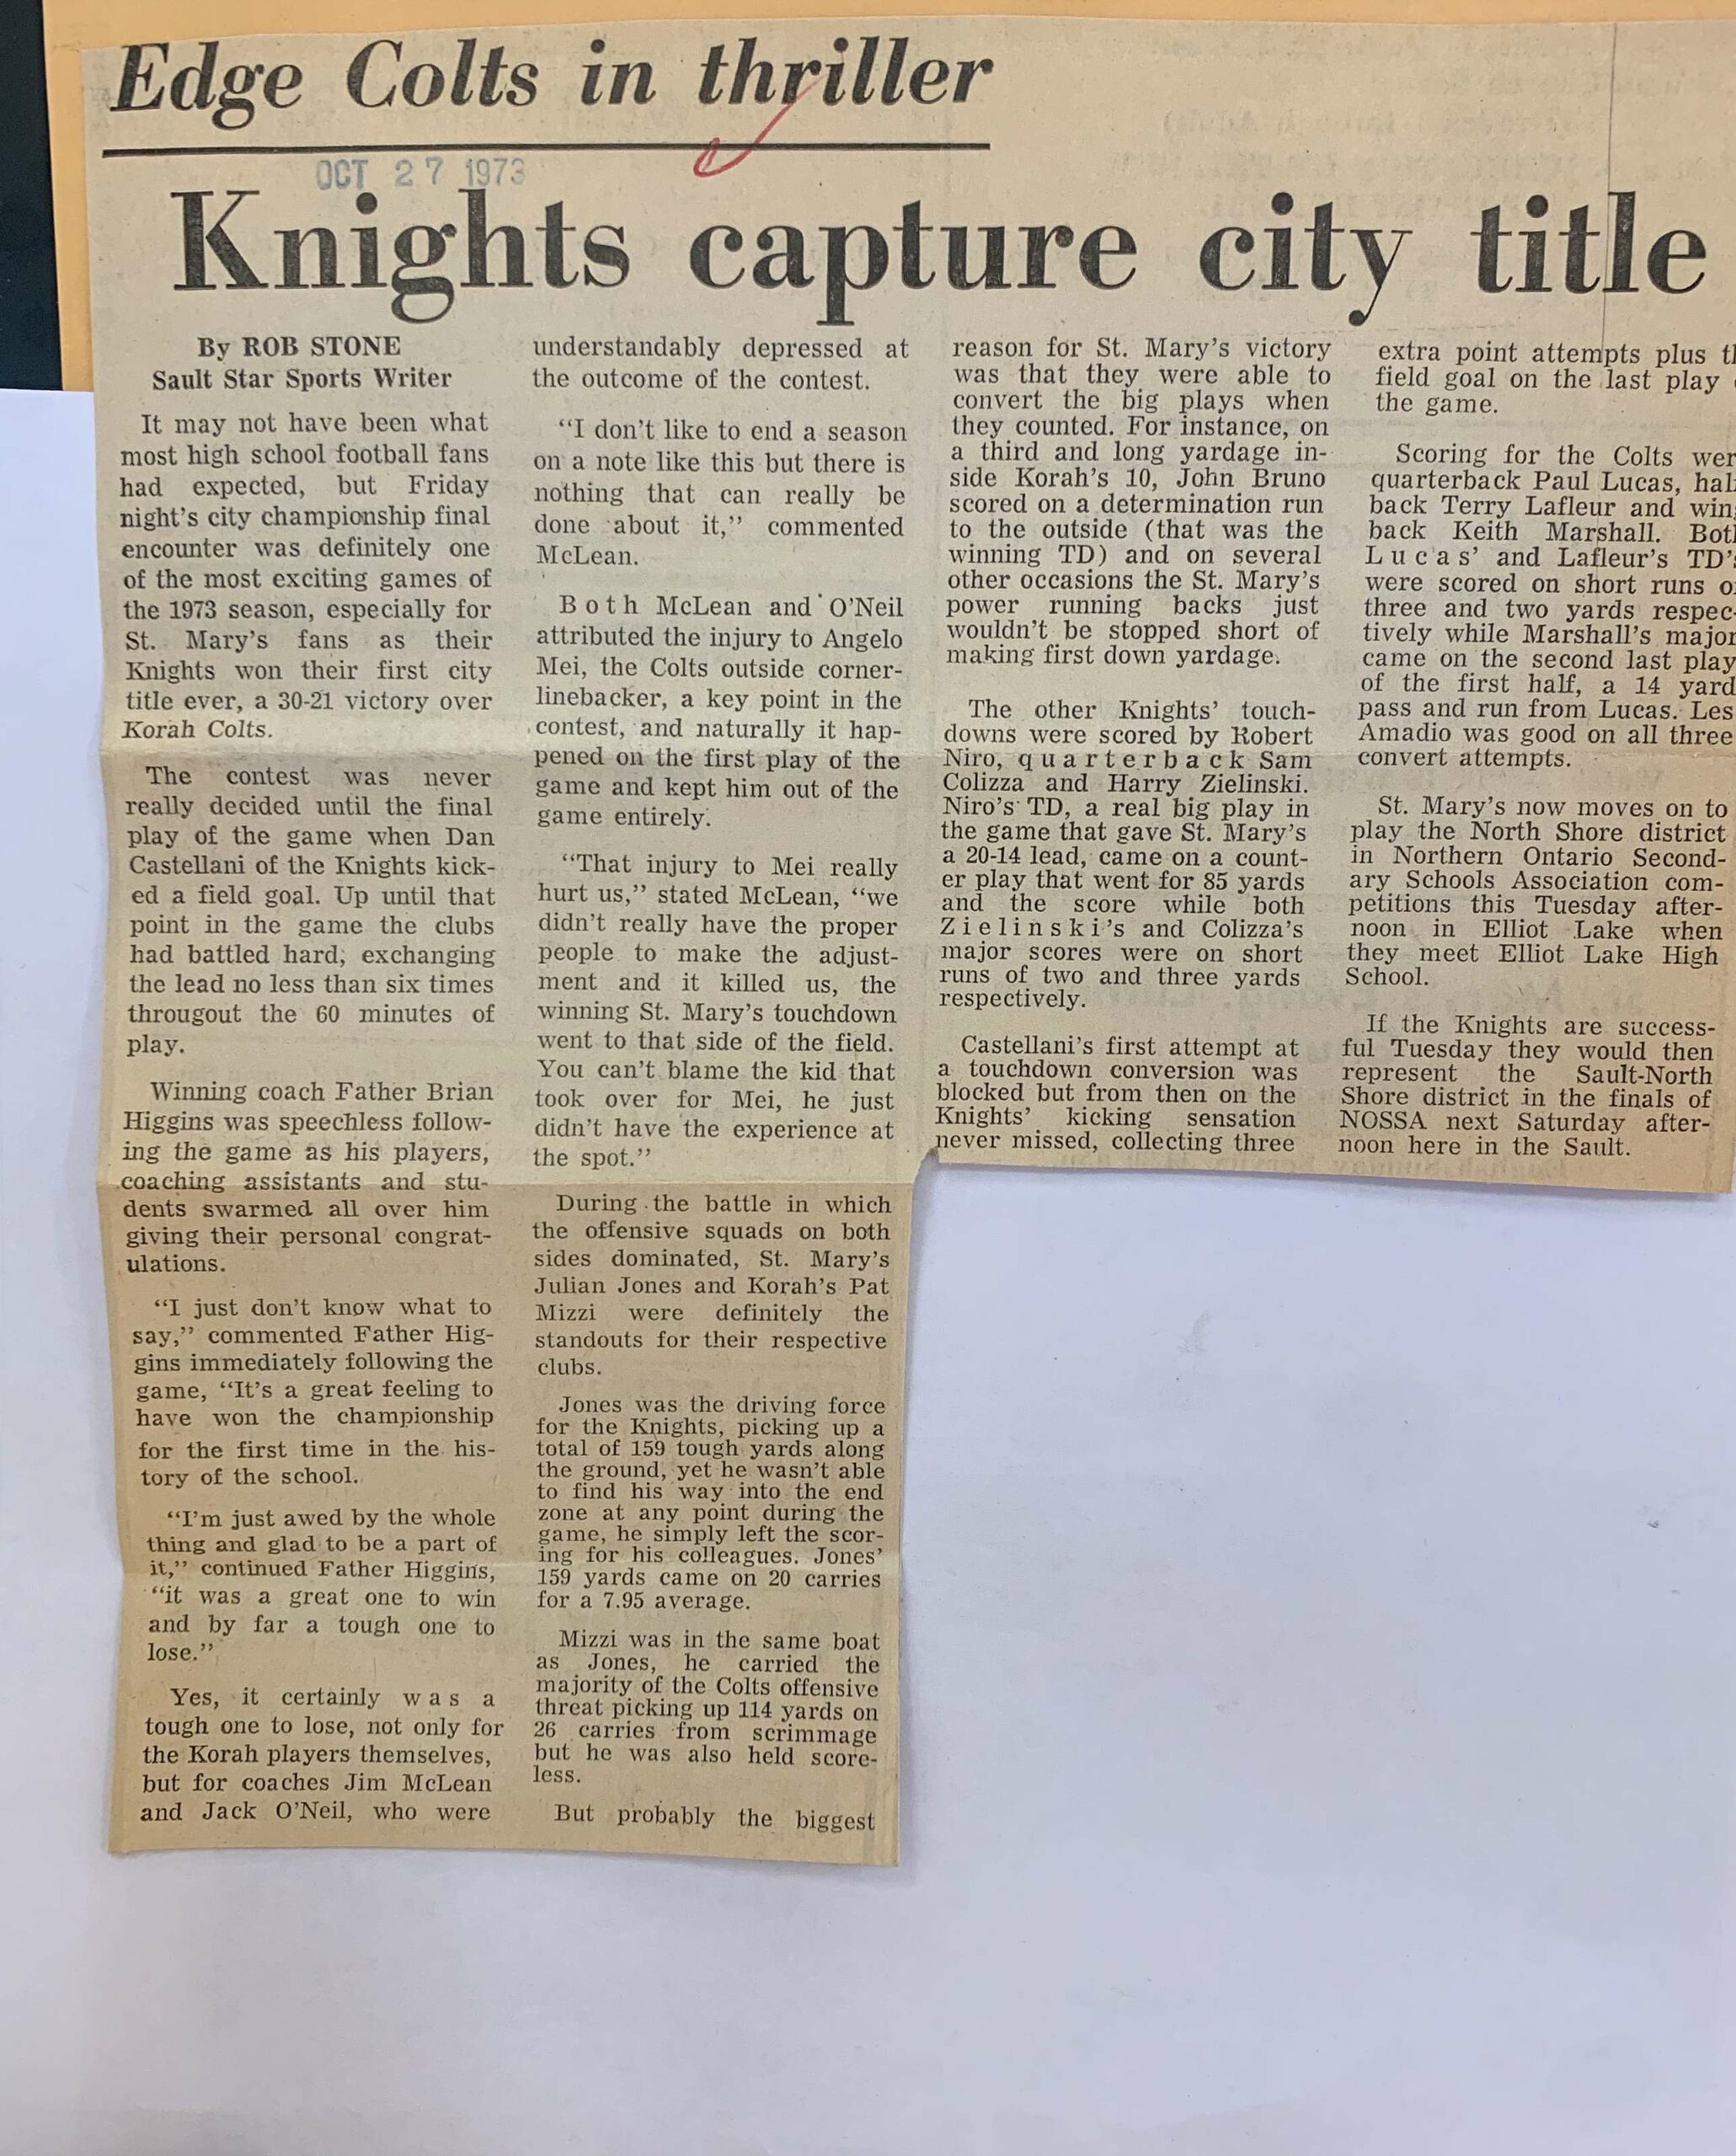 27-Oct-1973 Knights Caputre City Title - Scannable Document 9 on Aug 17, 2021 at 4_59_19 PM